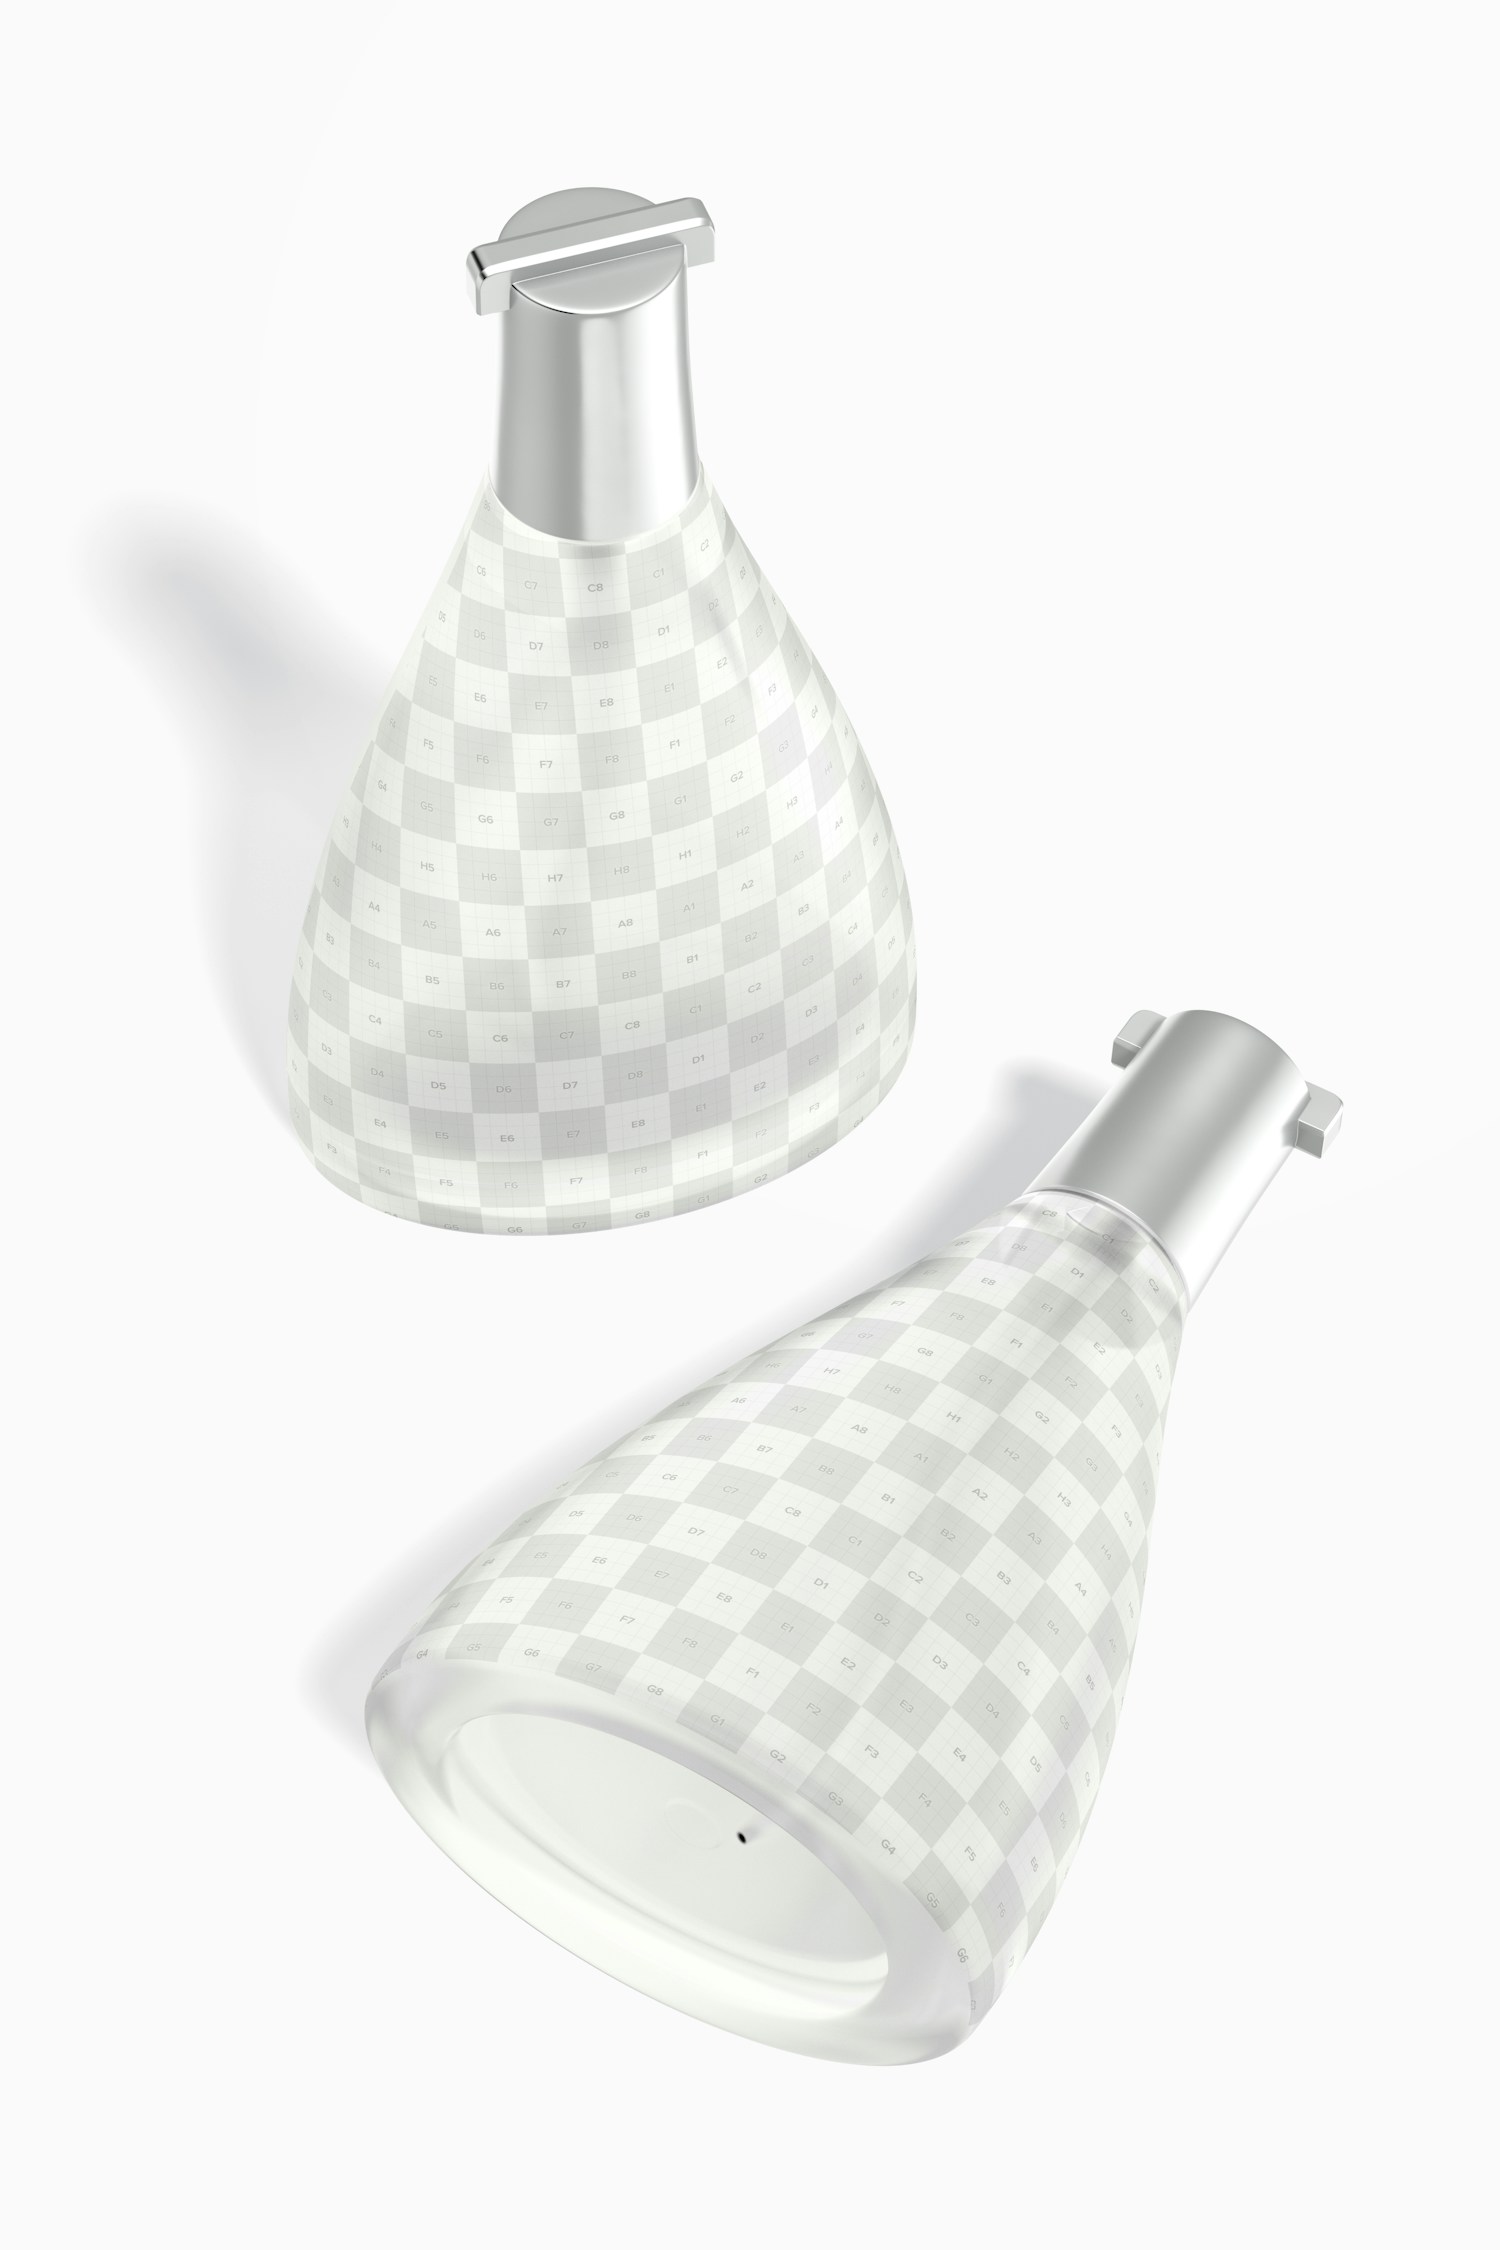 Triangular Luxury Perfume Bottles Mockup, Standing and Dropped